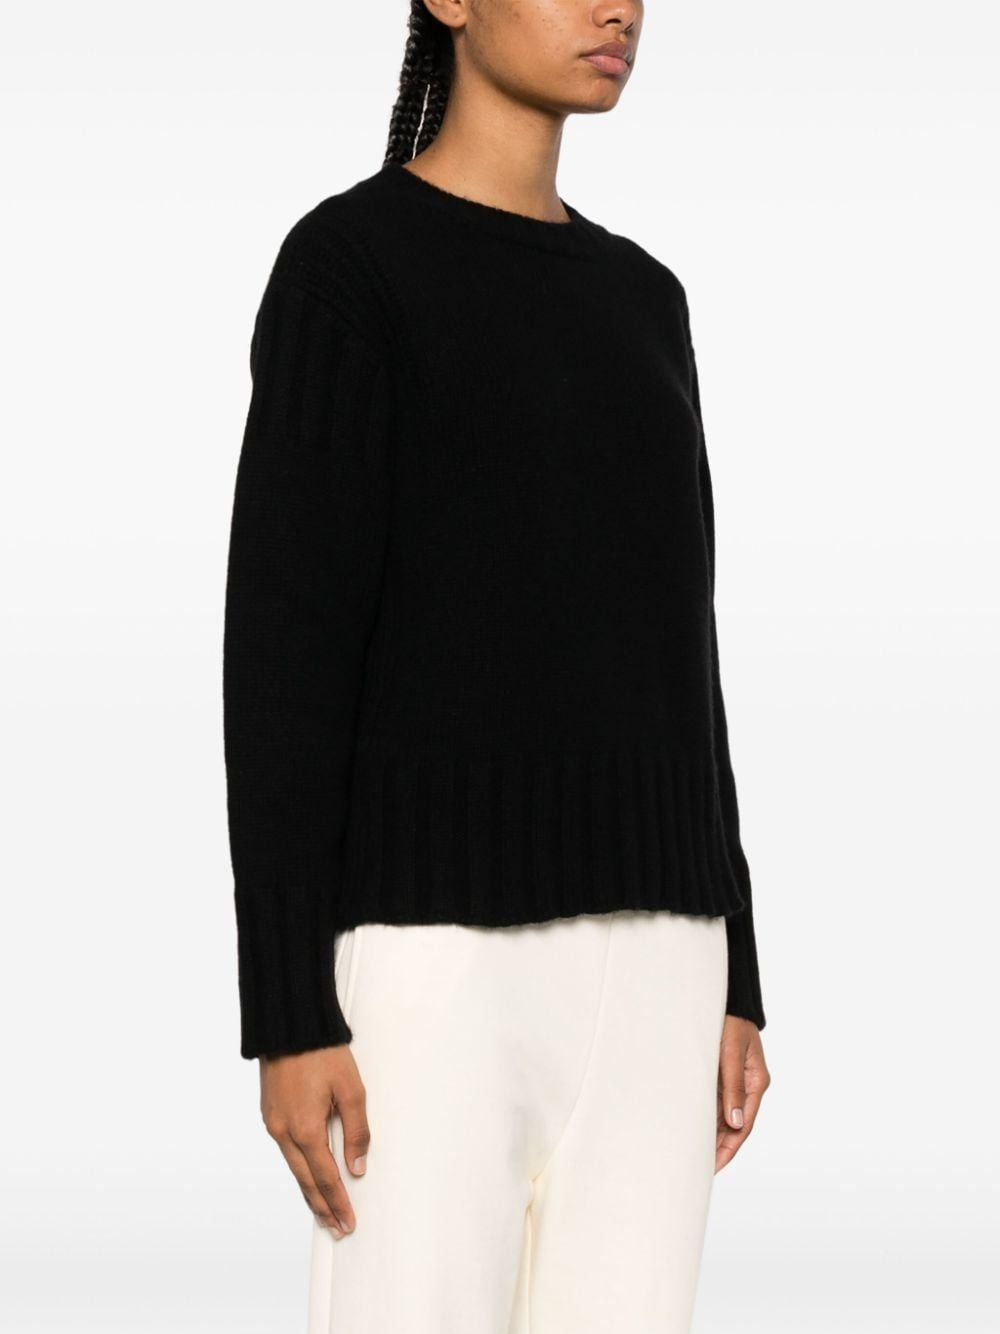 JIL SANDER Cozy and Chic Black Ribbed Cashmere Jumper for Women - FW23 Collection